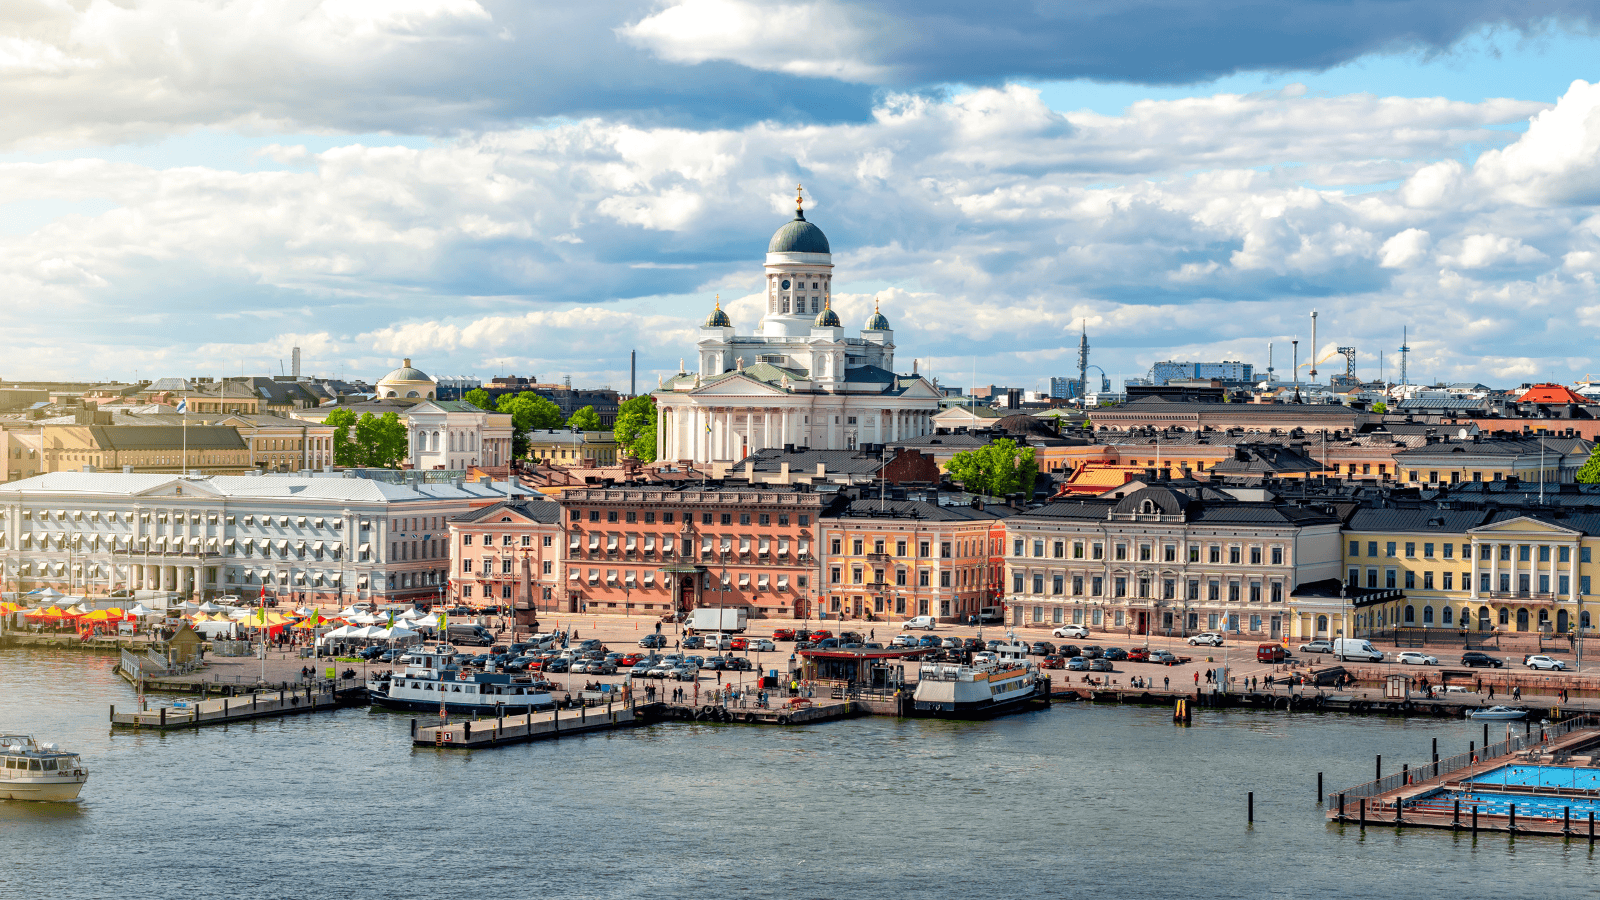 <p>Consider planning your next stopover in Finland’s capital, Helsinki. There are many fun things to see and do for history and architecture lovers.</p><p>Since Helsinki is compact, you can see several top sights within a few hours. The city has free two-hour walking tours perfect for those on a stopover. Unwind mid-journey at one of the city’s relaxing saunas.</p>